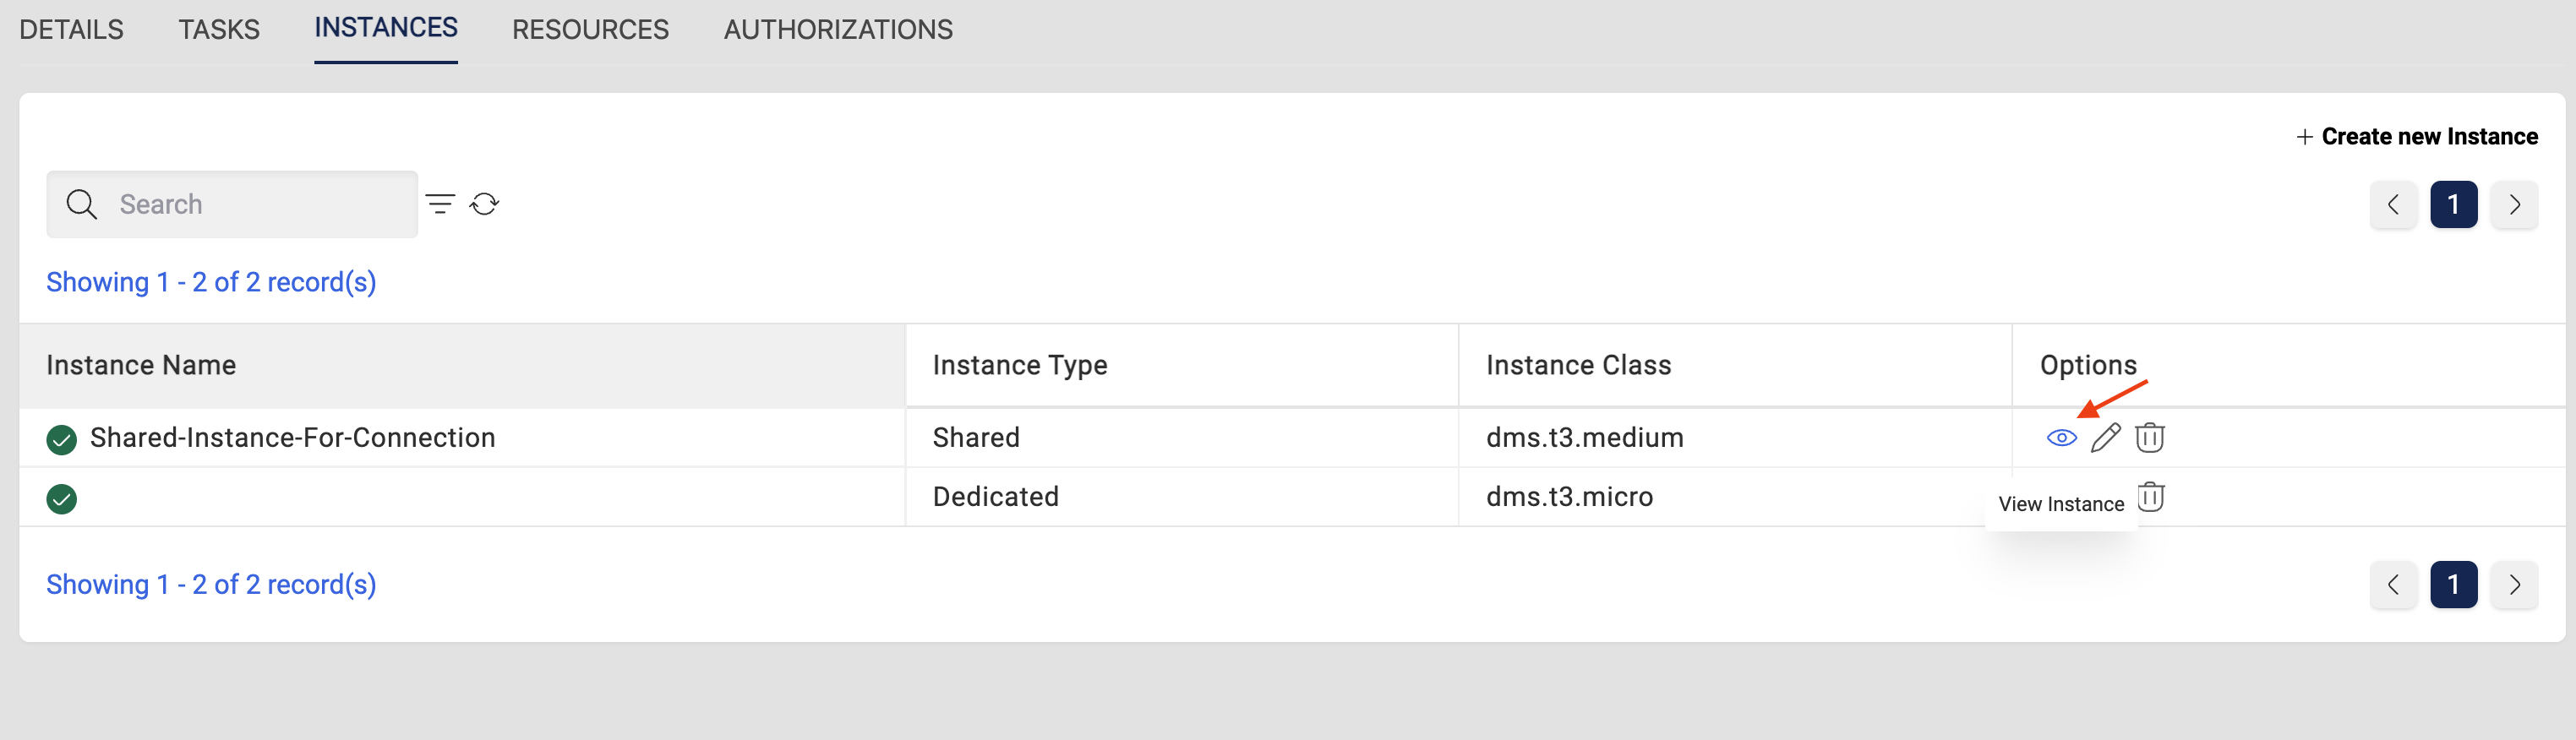 Shared Instance view option